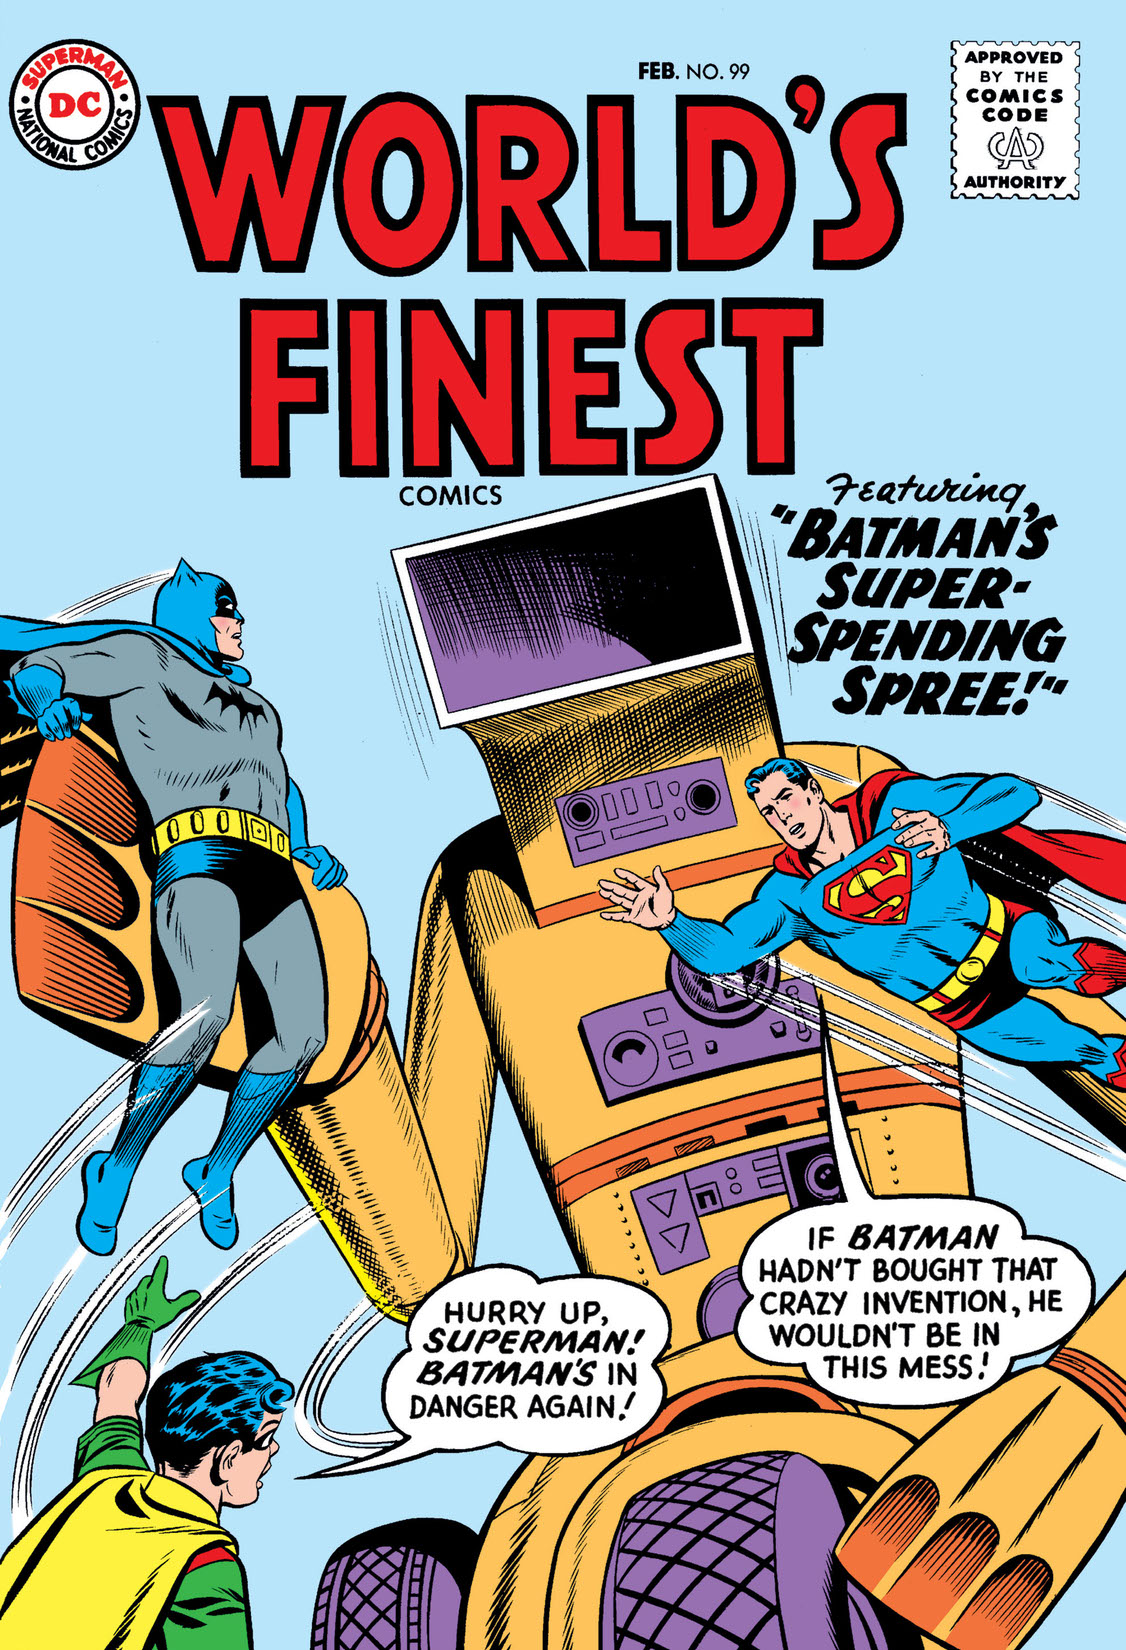 World's Finest Comics (1941-) #99 preview images